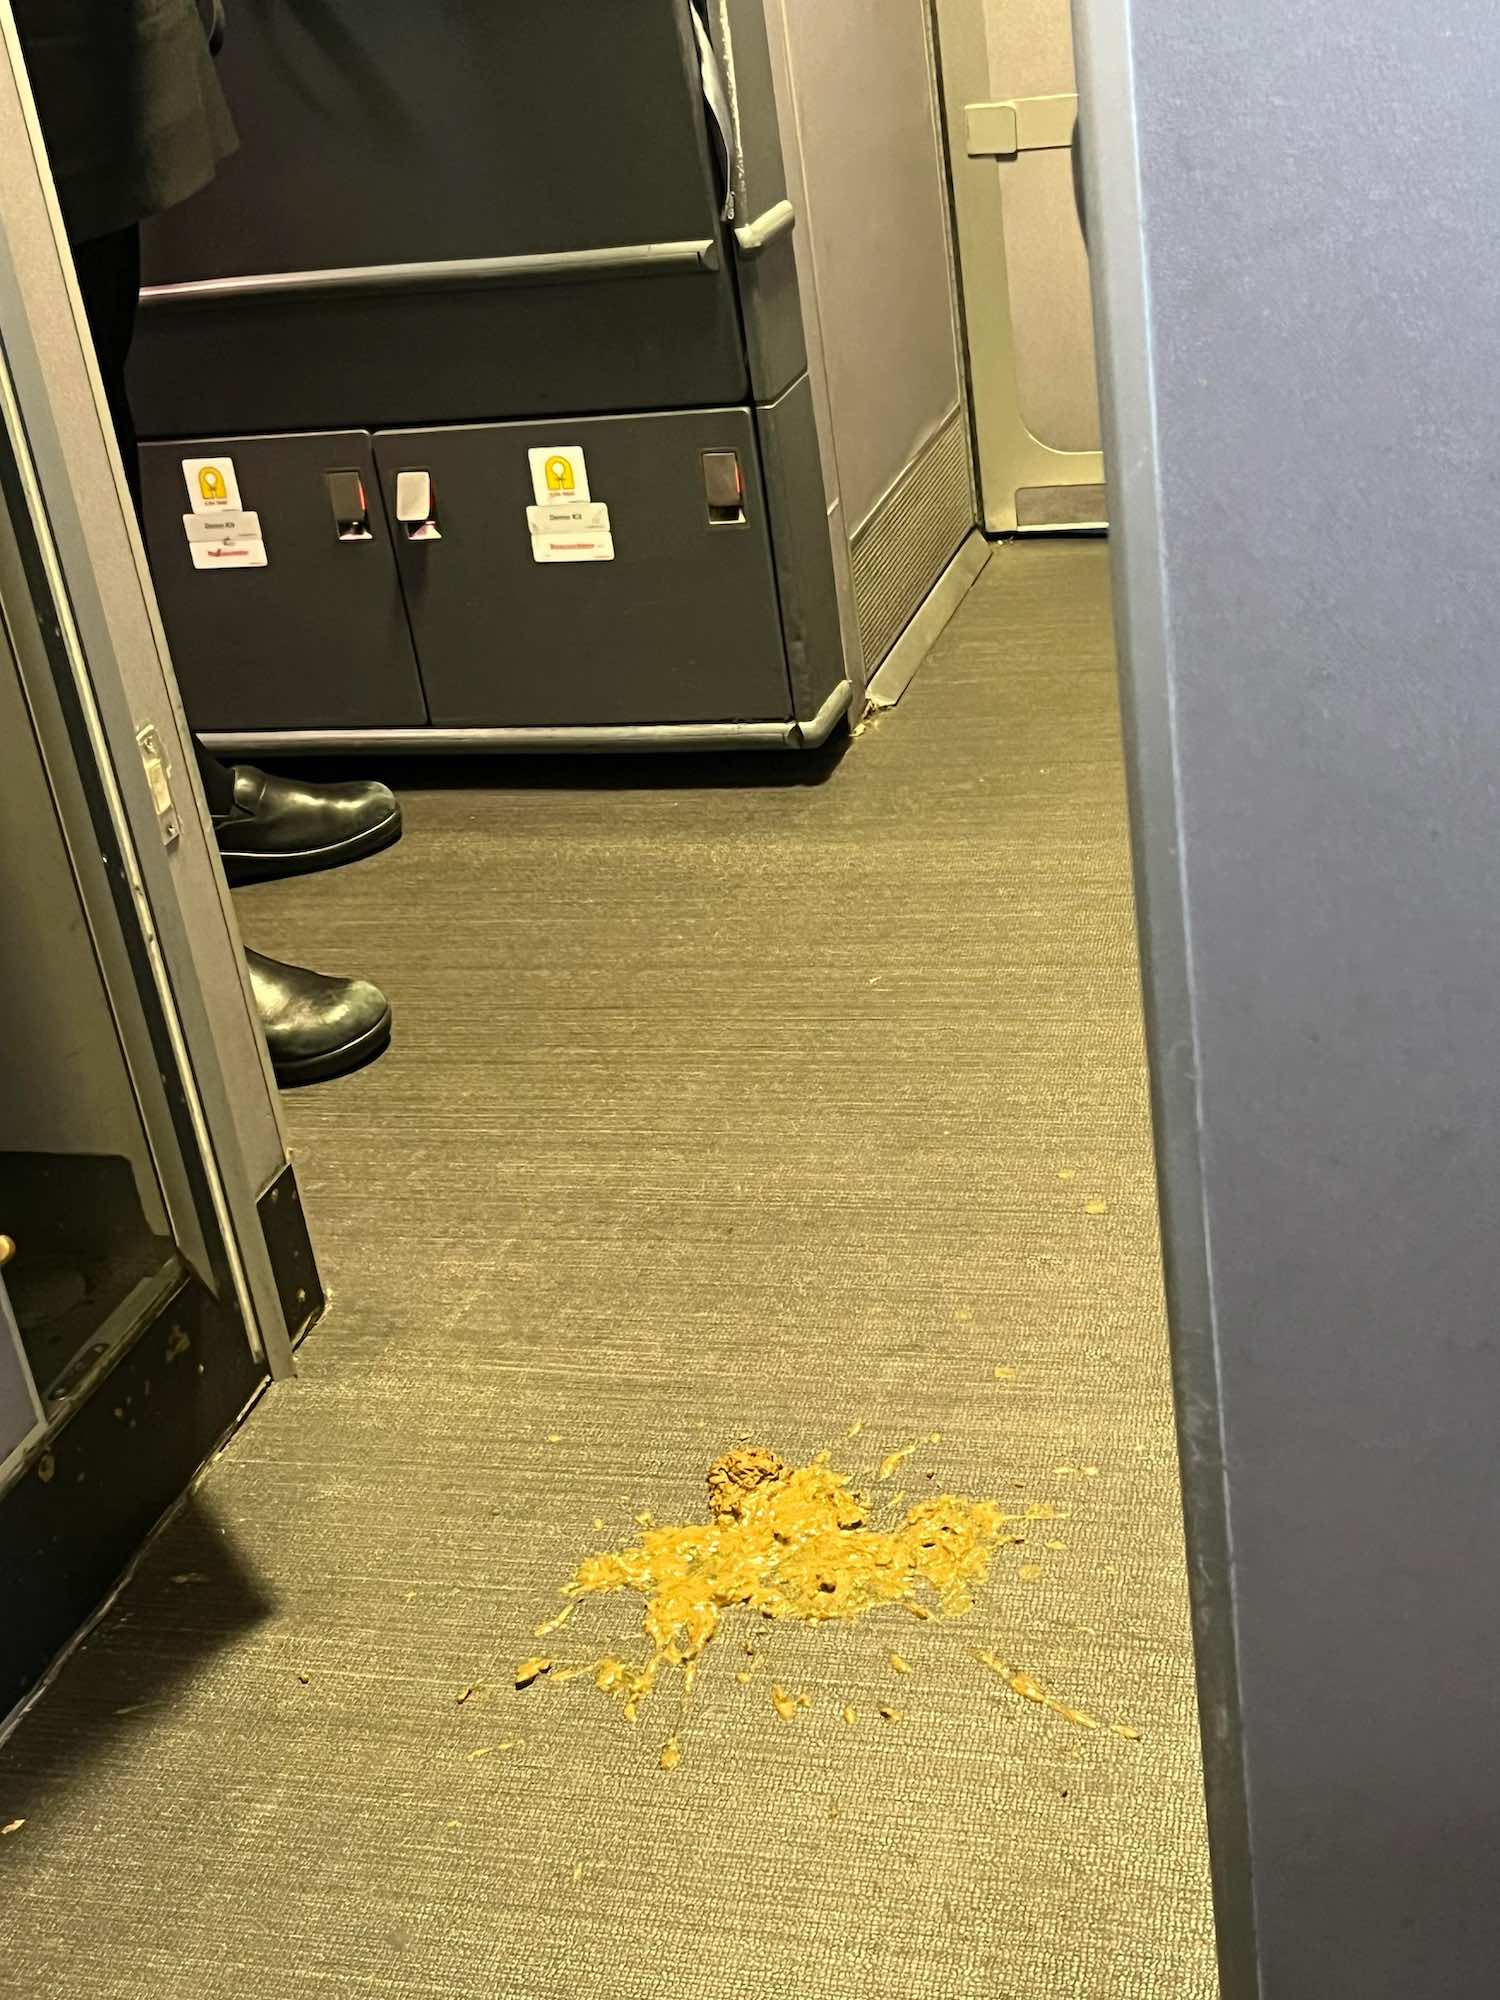 a yellow crumbs on the floor